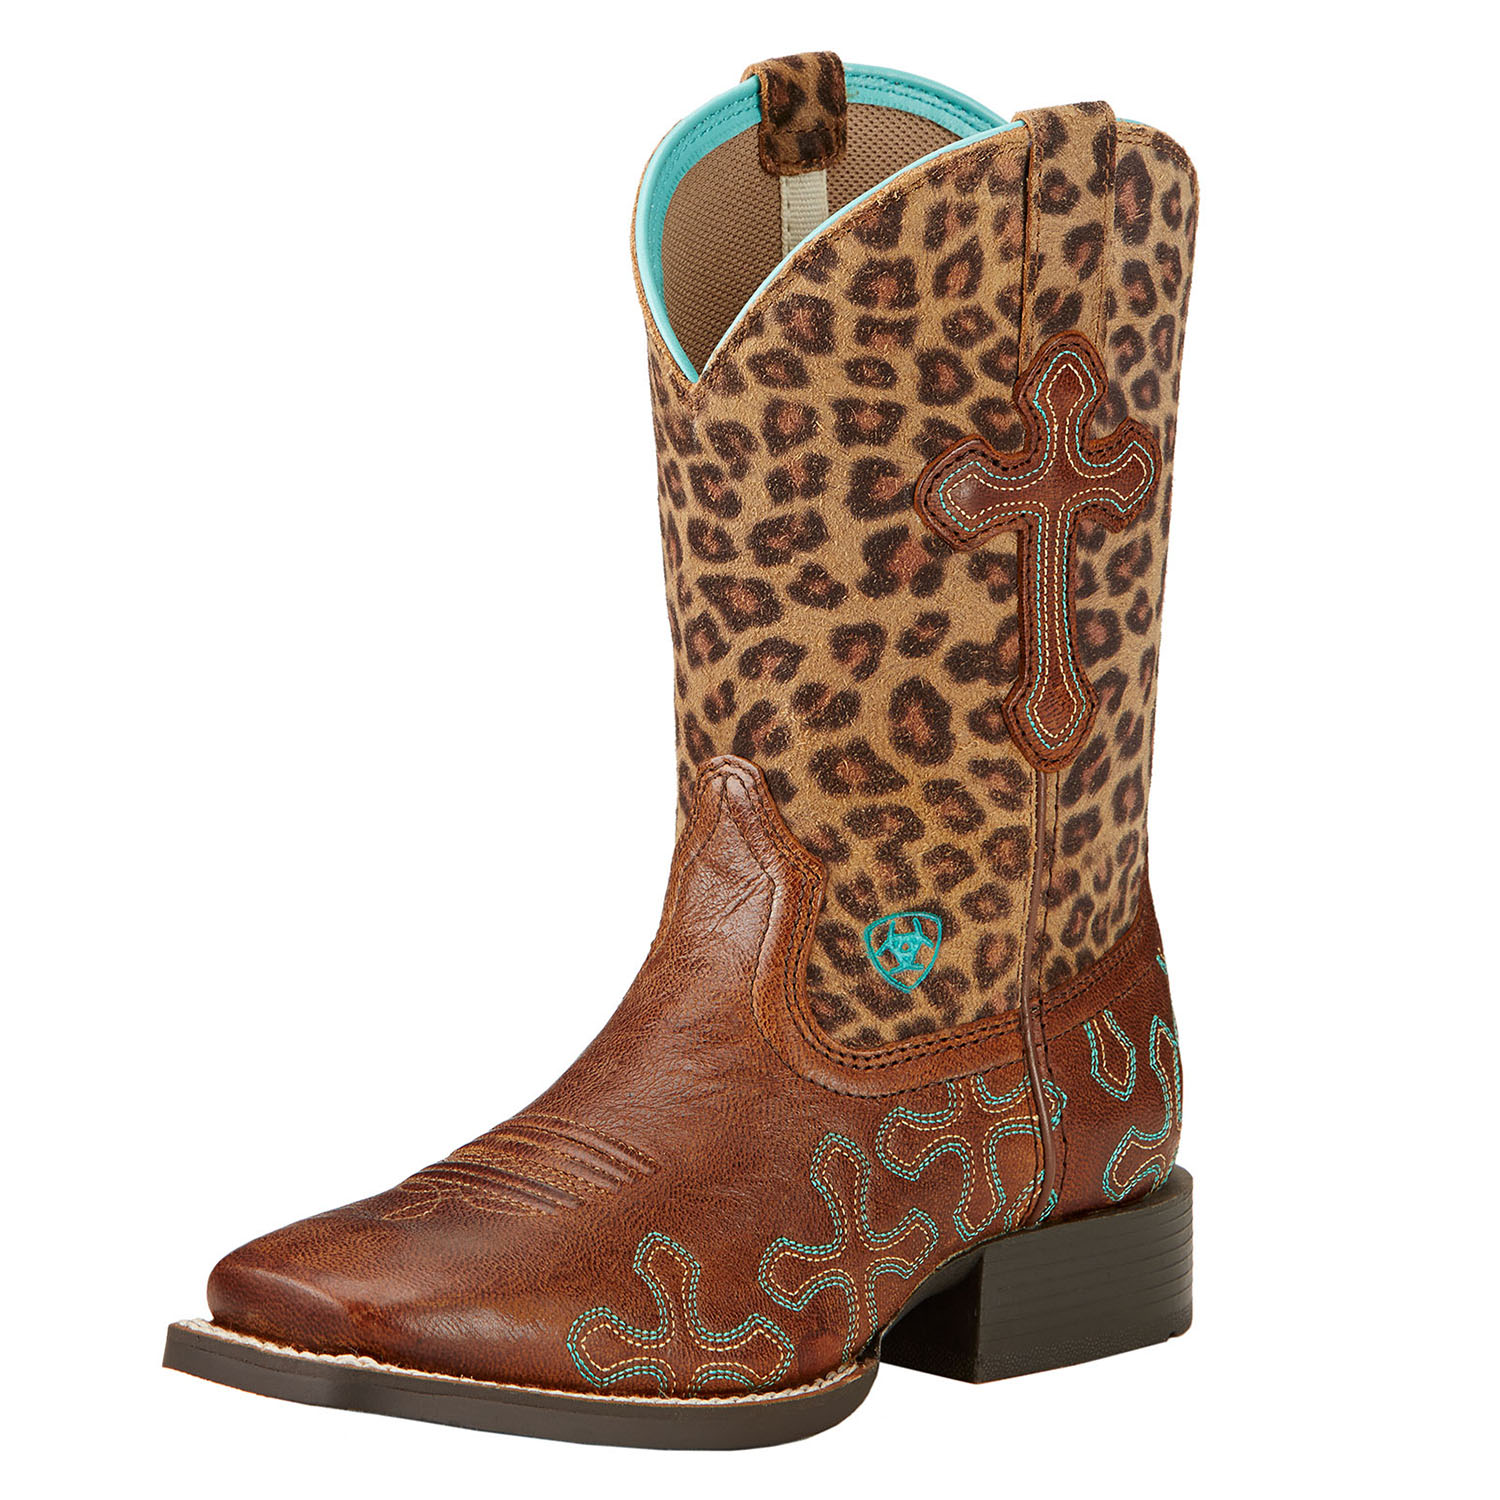 List 100+ Pictures Images Of Cowgirl Boots Latest